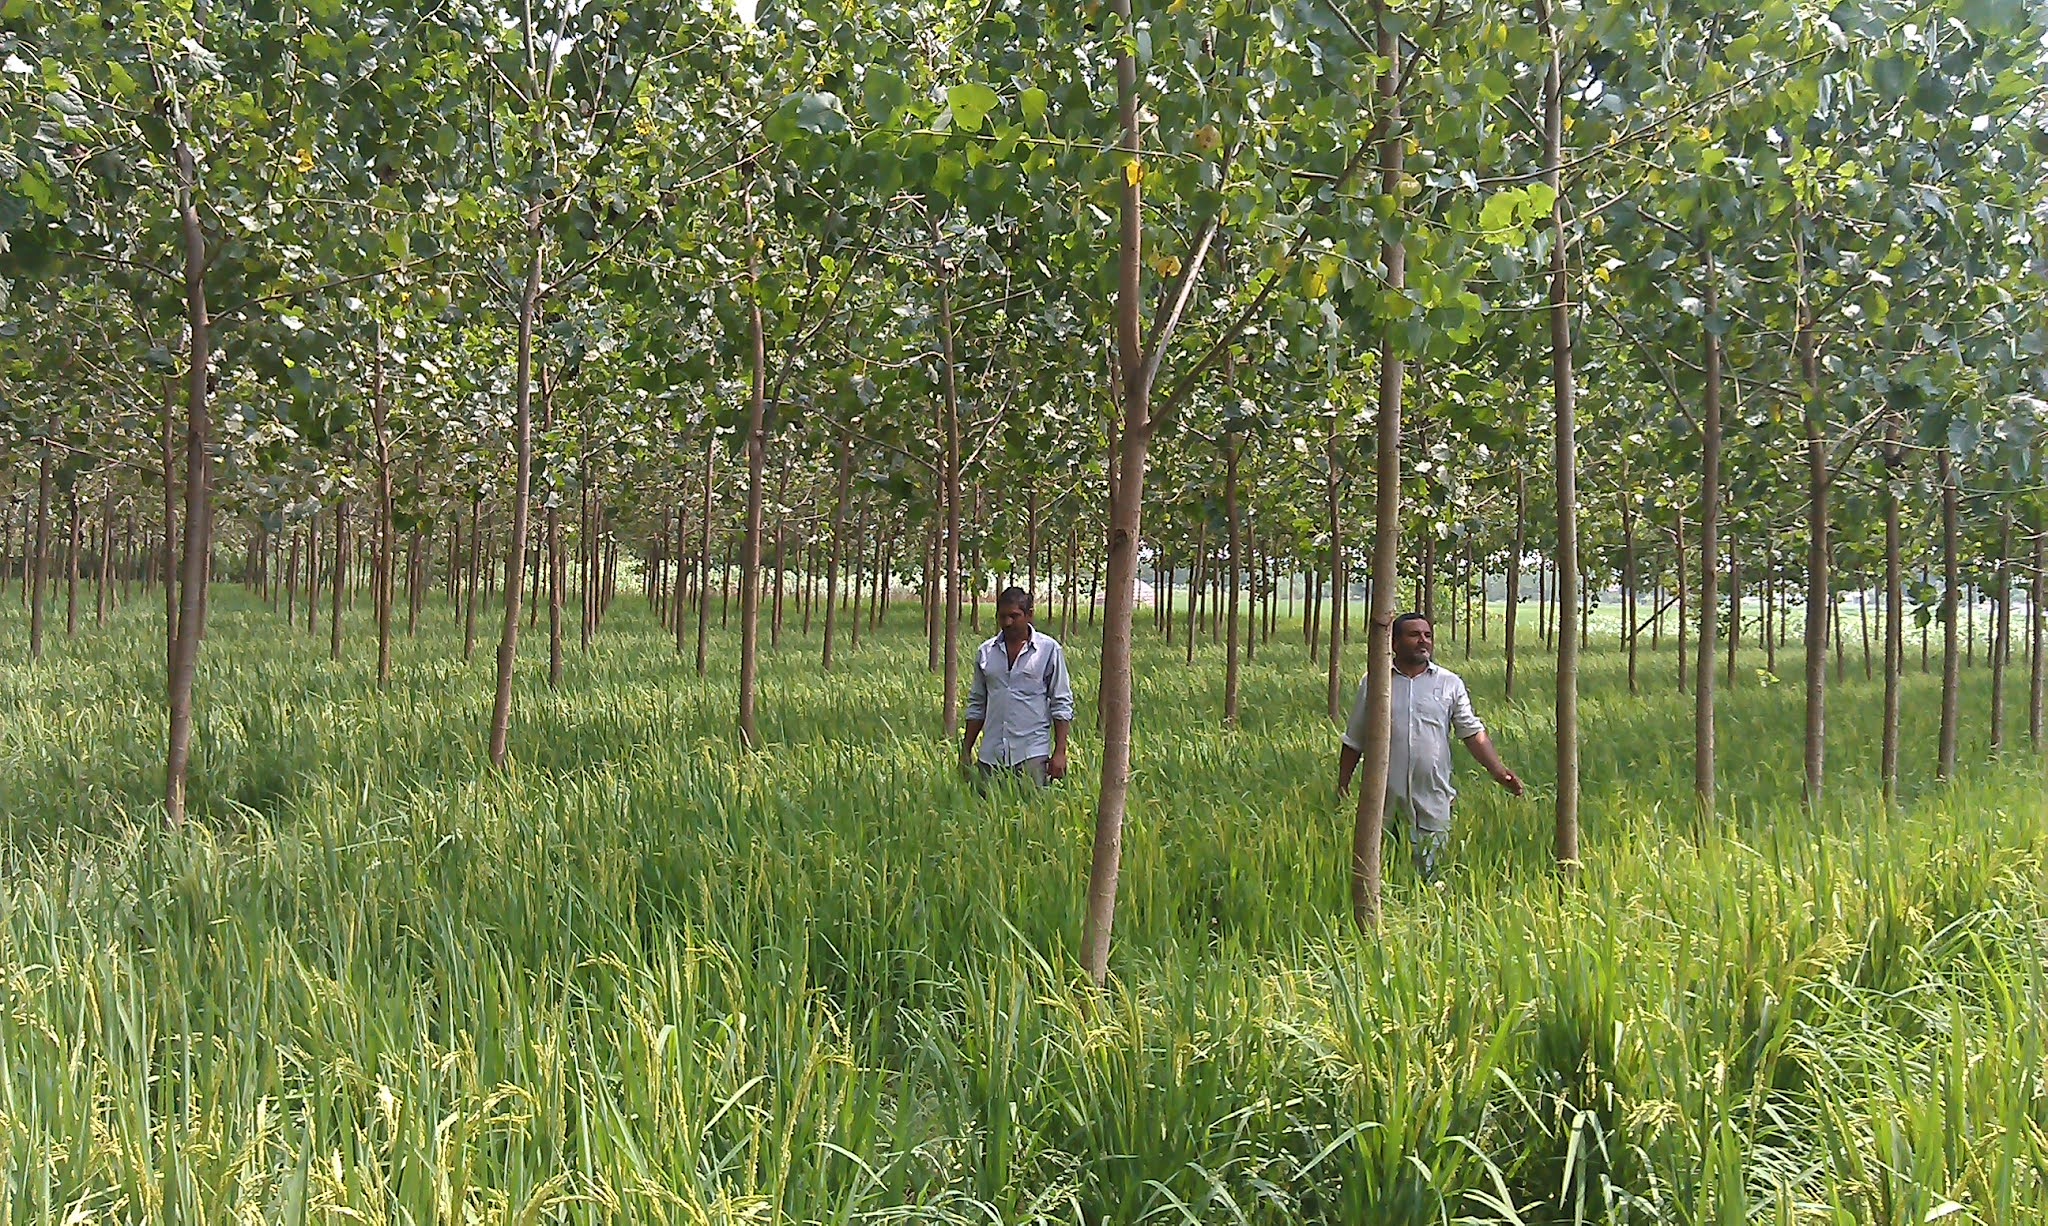 A model of Agroforestry in Nepal